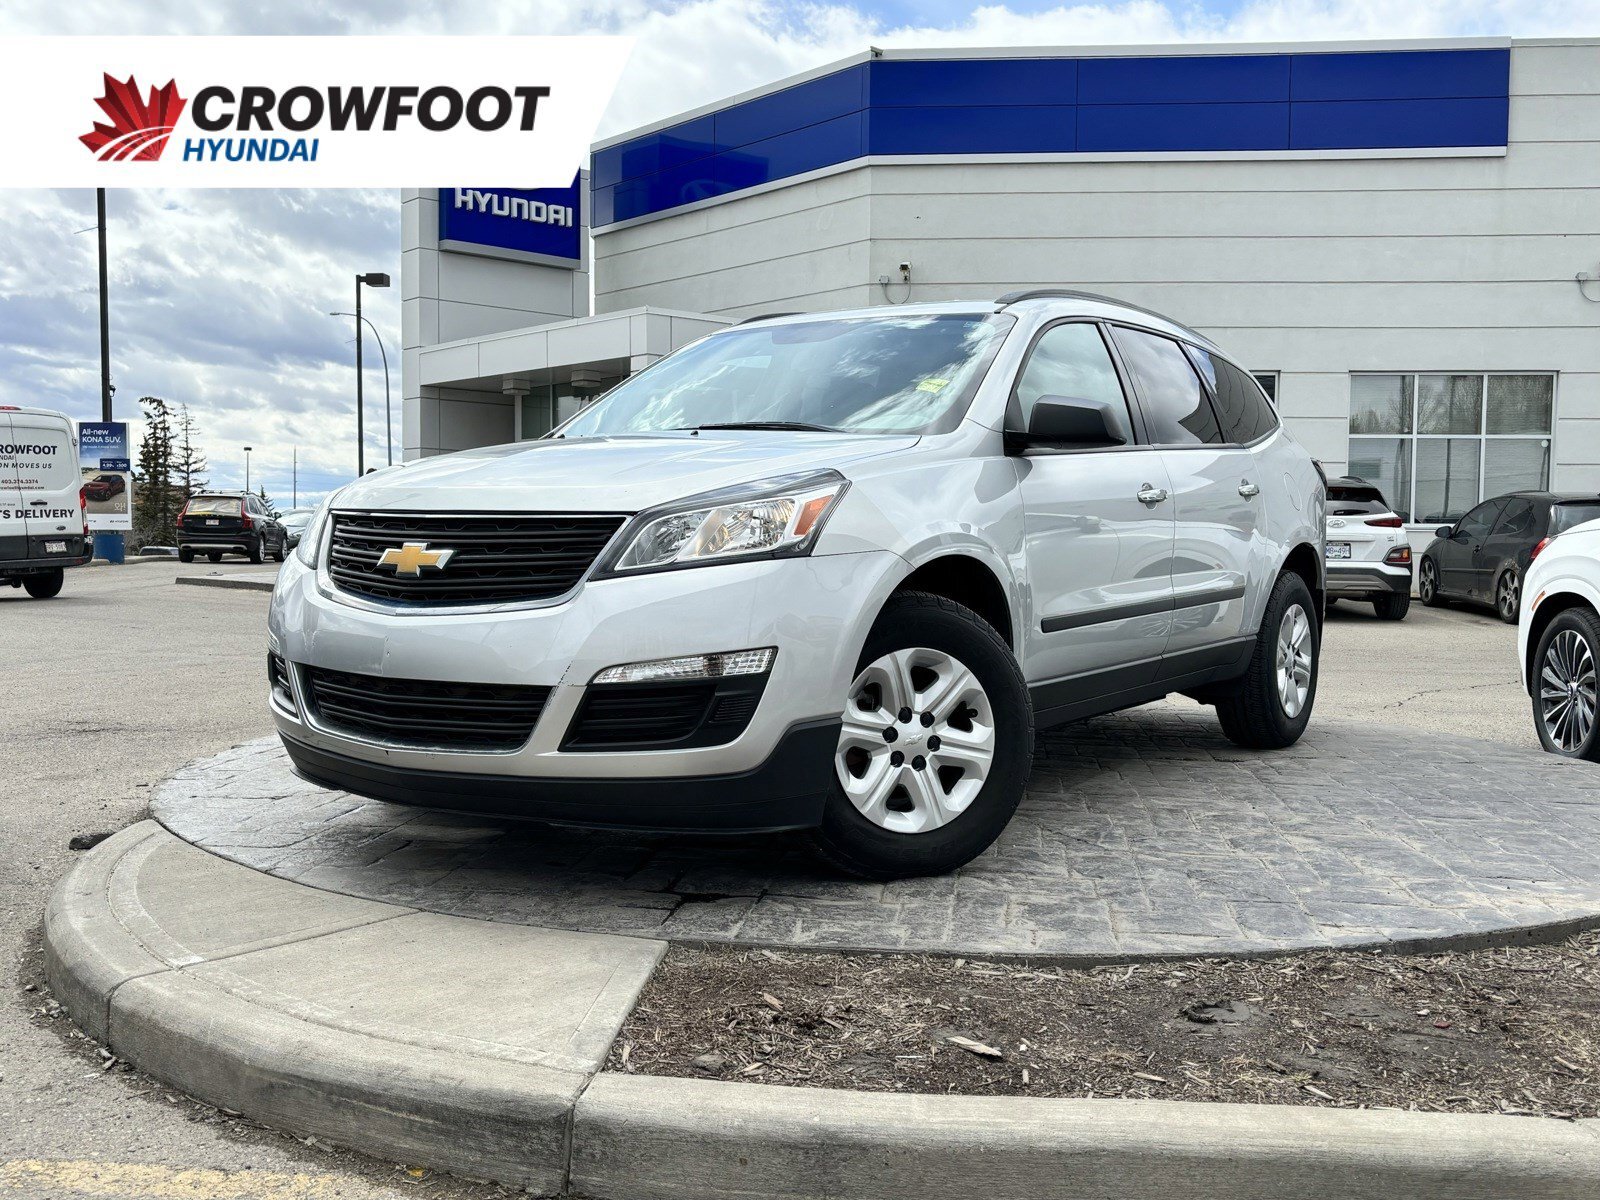 2013 Chevrolet Traverse LS - No Accidents, One Owner, 3 Rows, B/U Camera